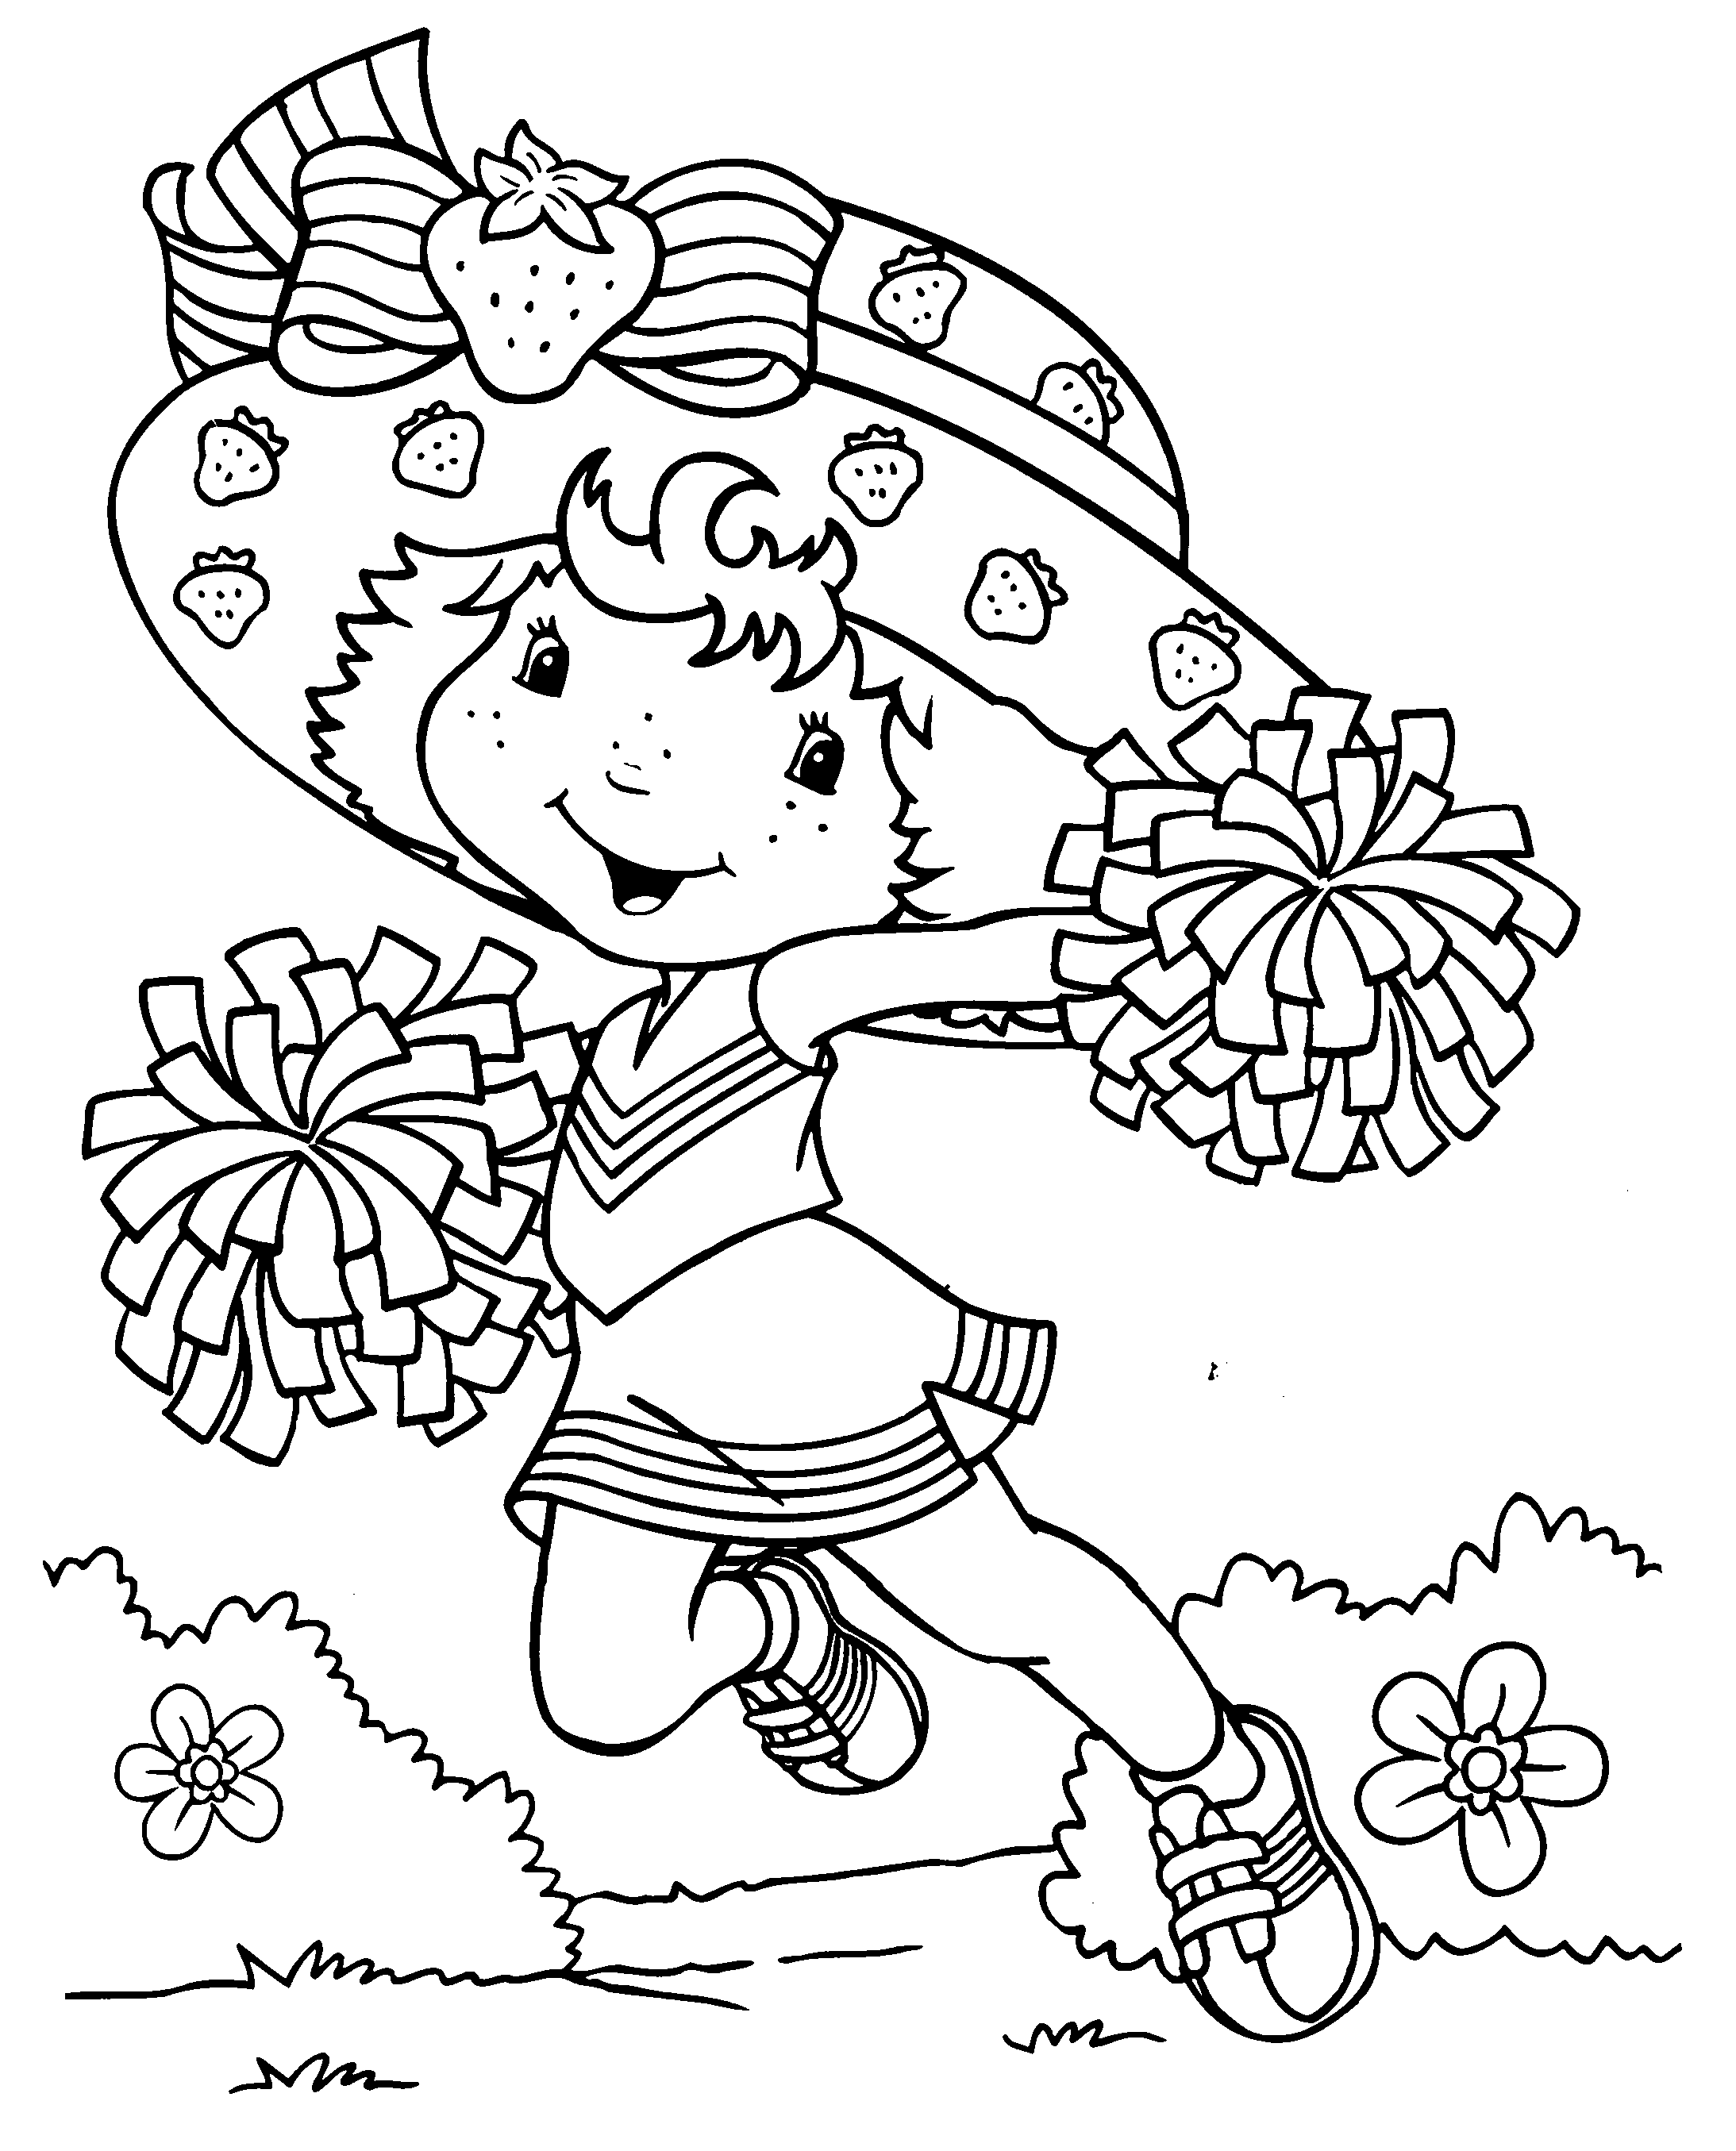 coloring pages strawberry shortcake strawberry shortcake to download for free strawberry pages shortcake coloring strawberry 